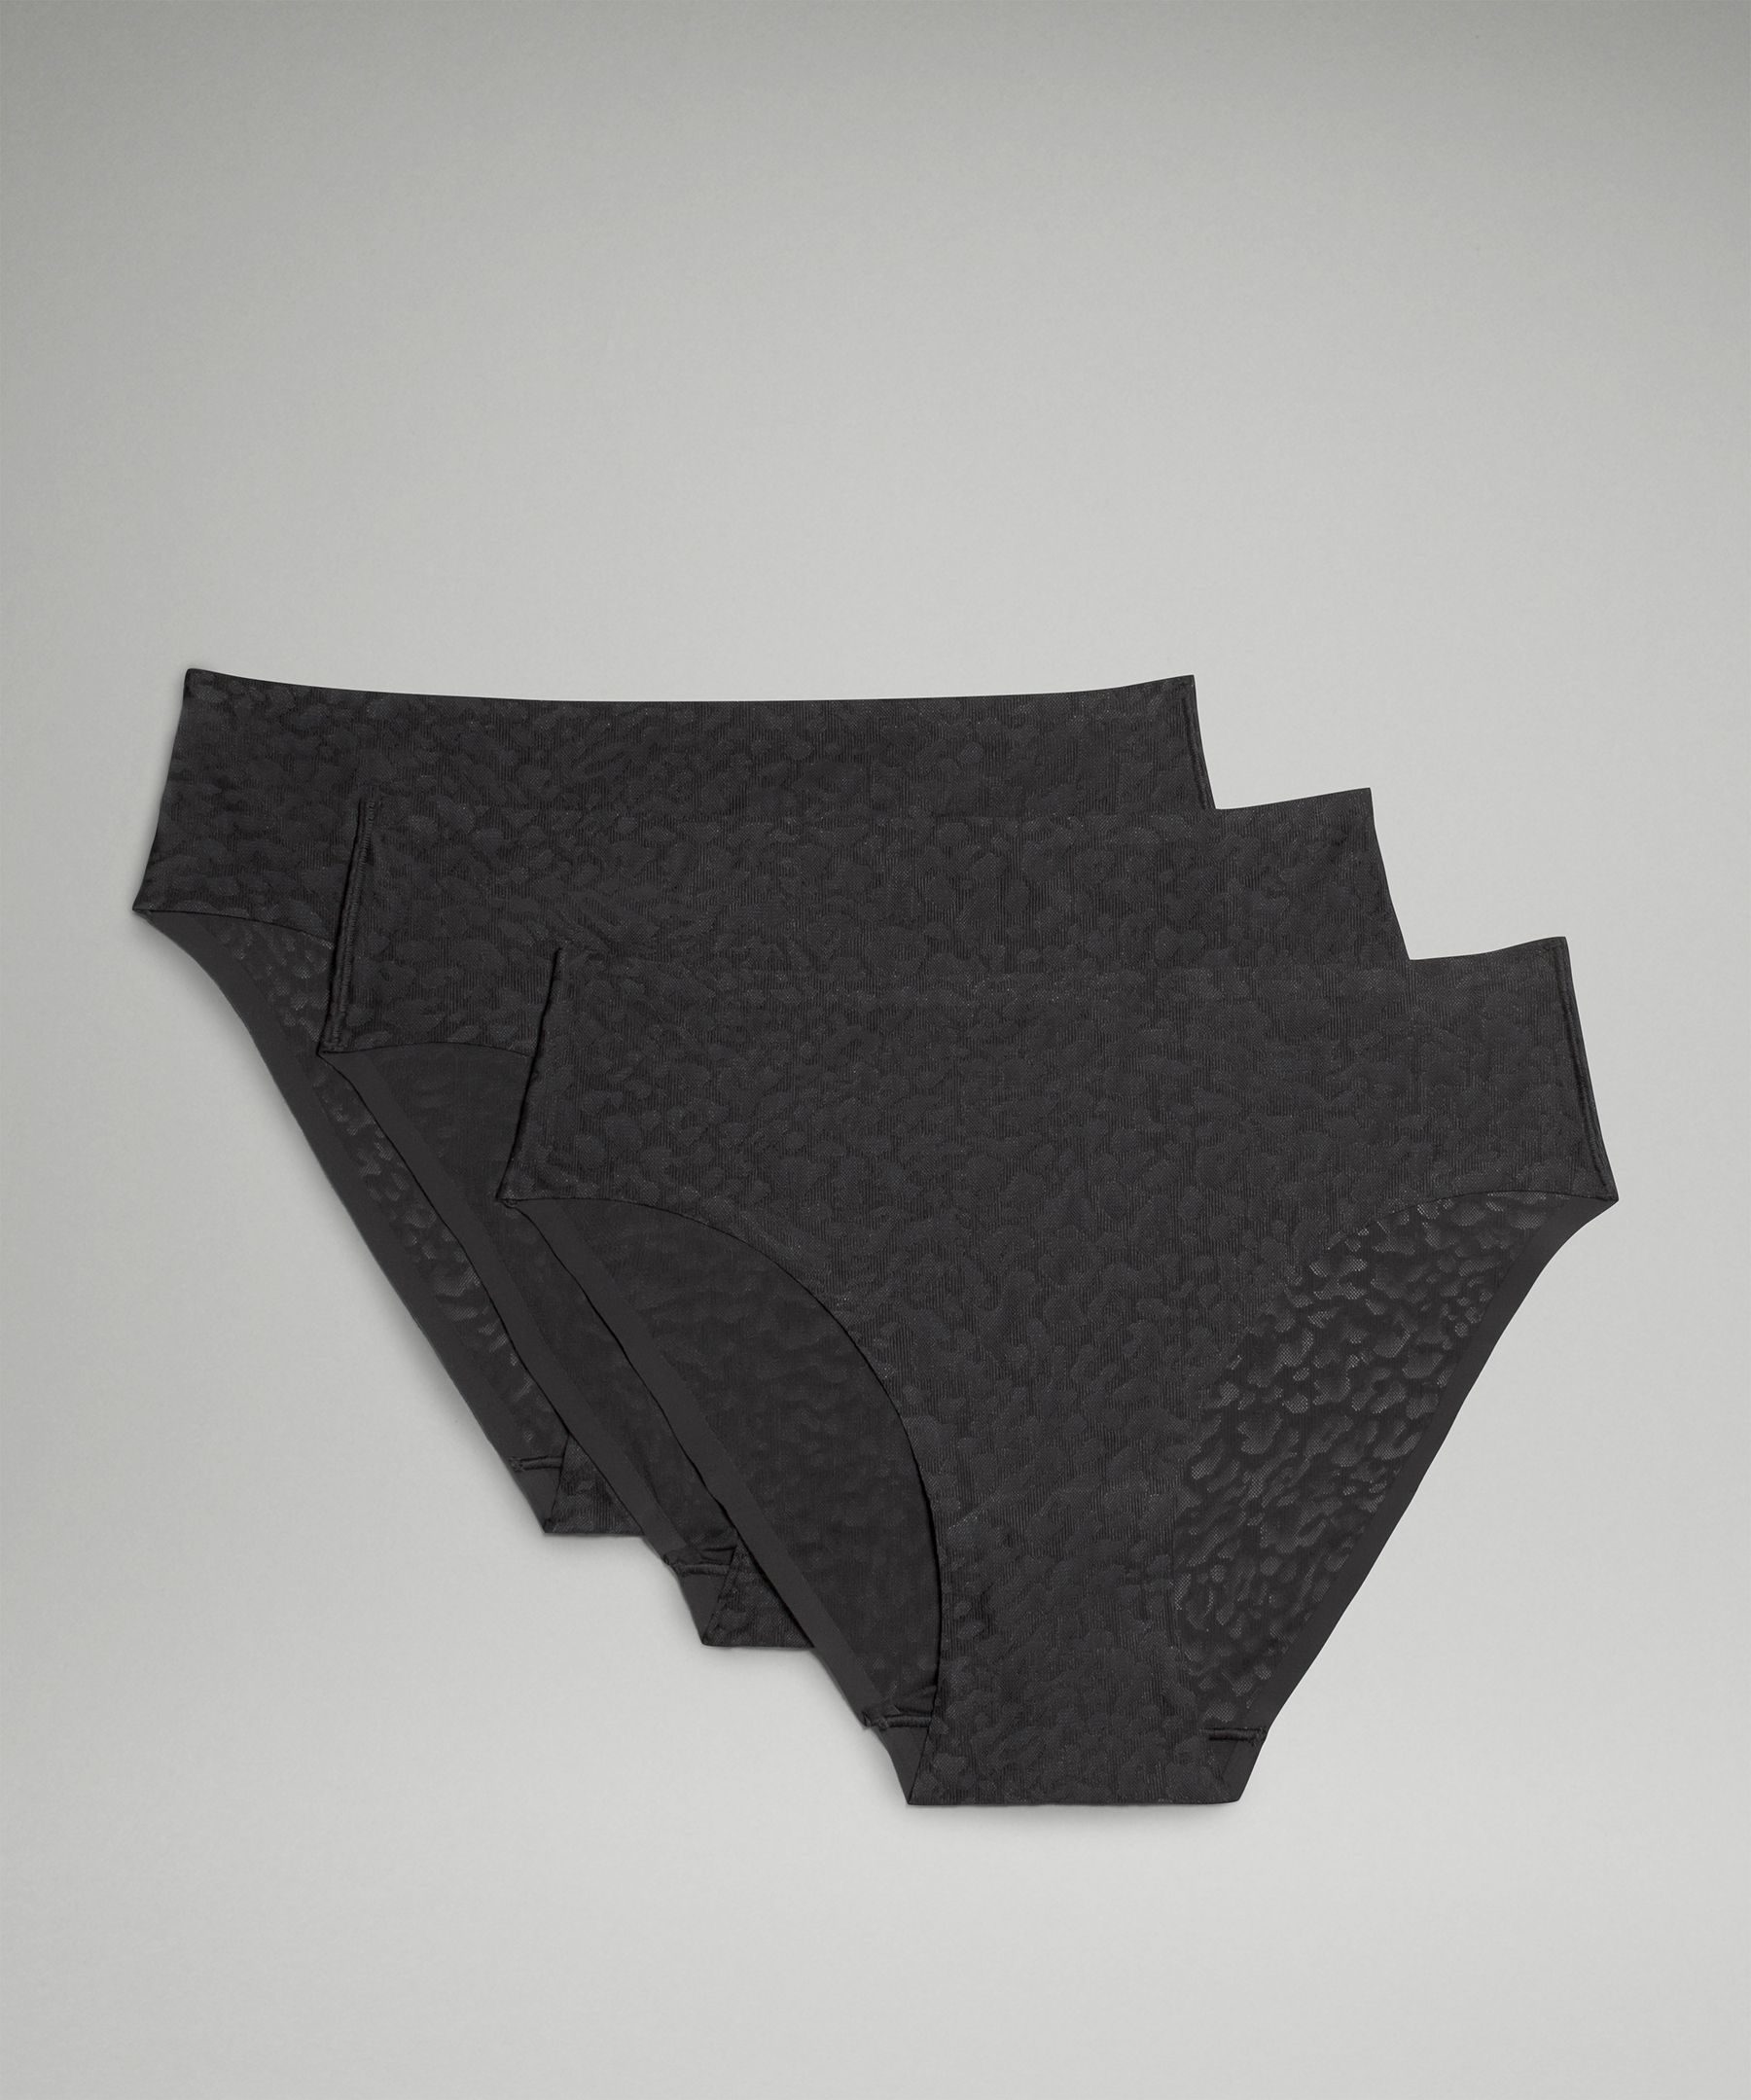 Lululemon Seamless Mid-Rise Hipster Underwear 3 Pack - ShopStyle Lingerie